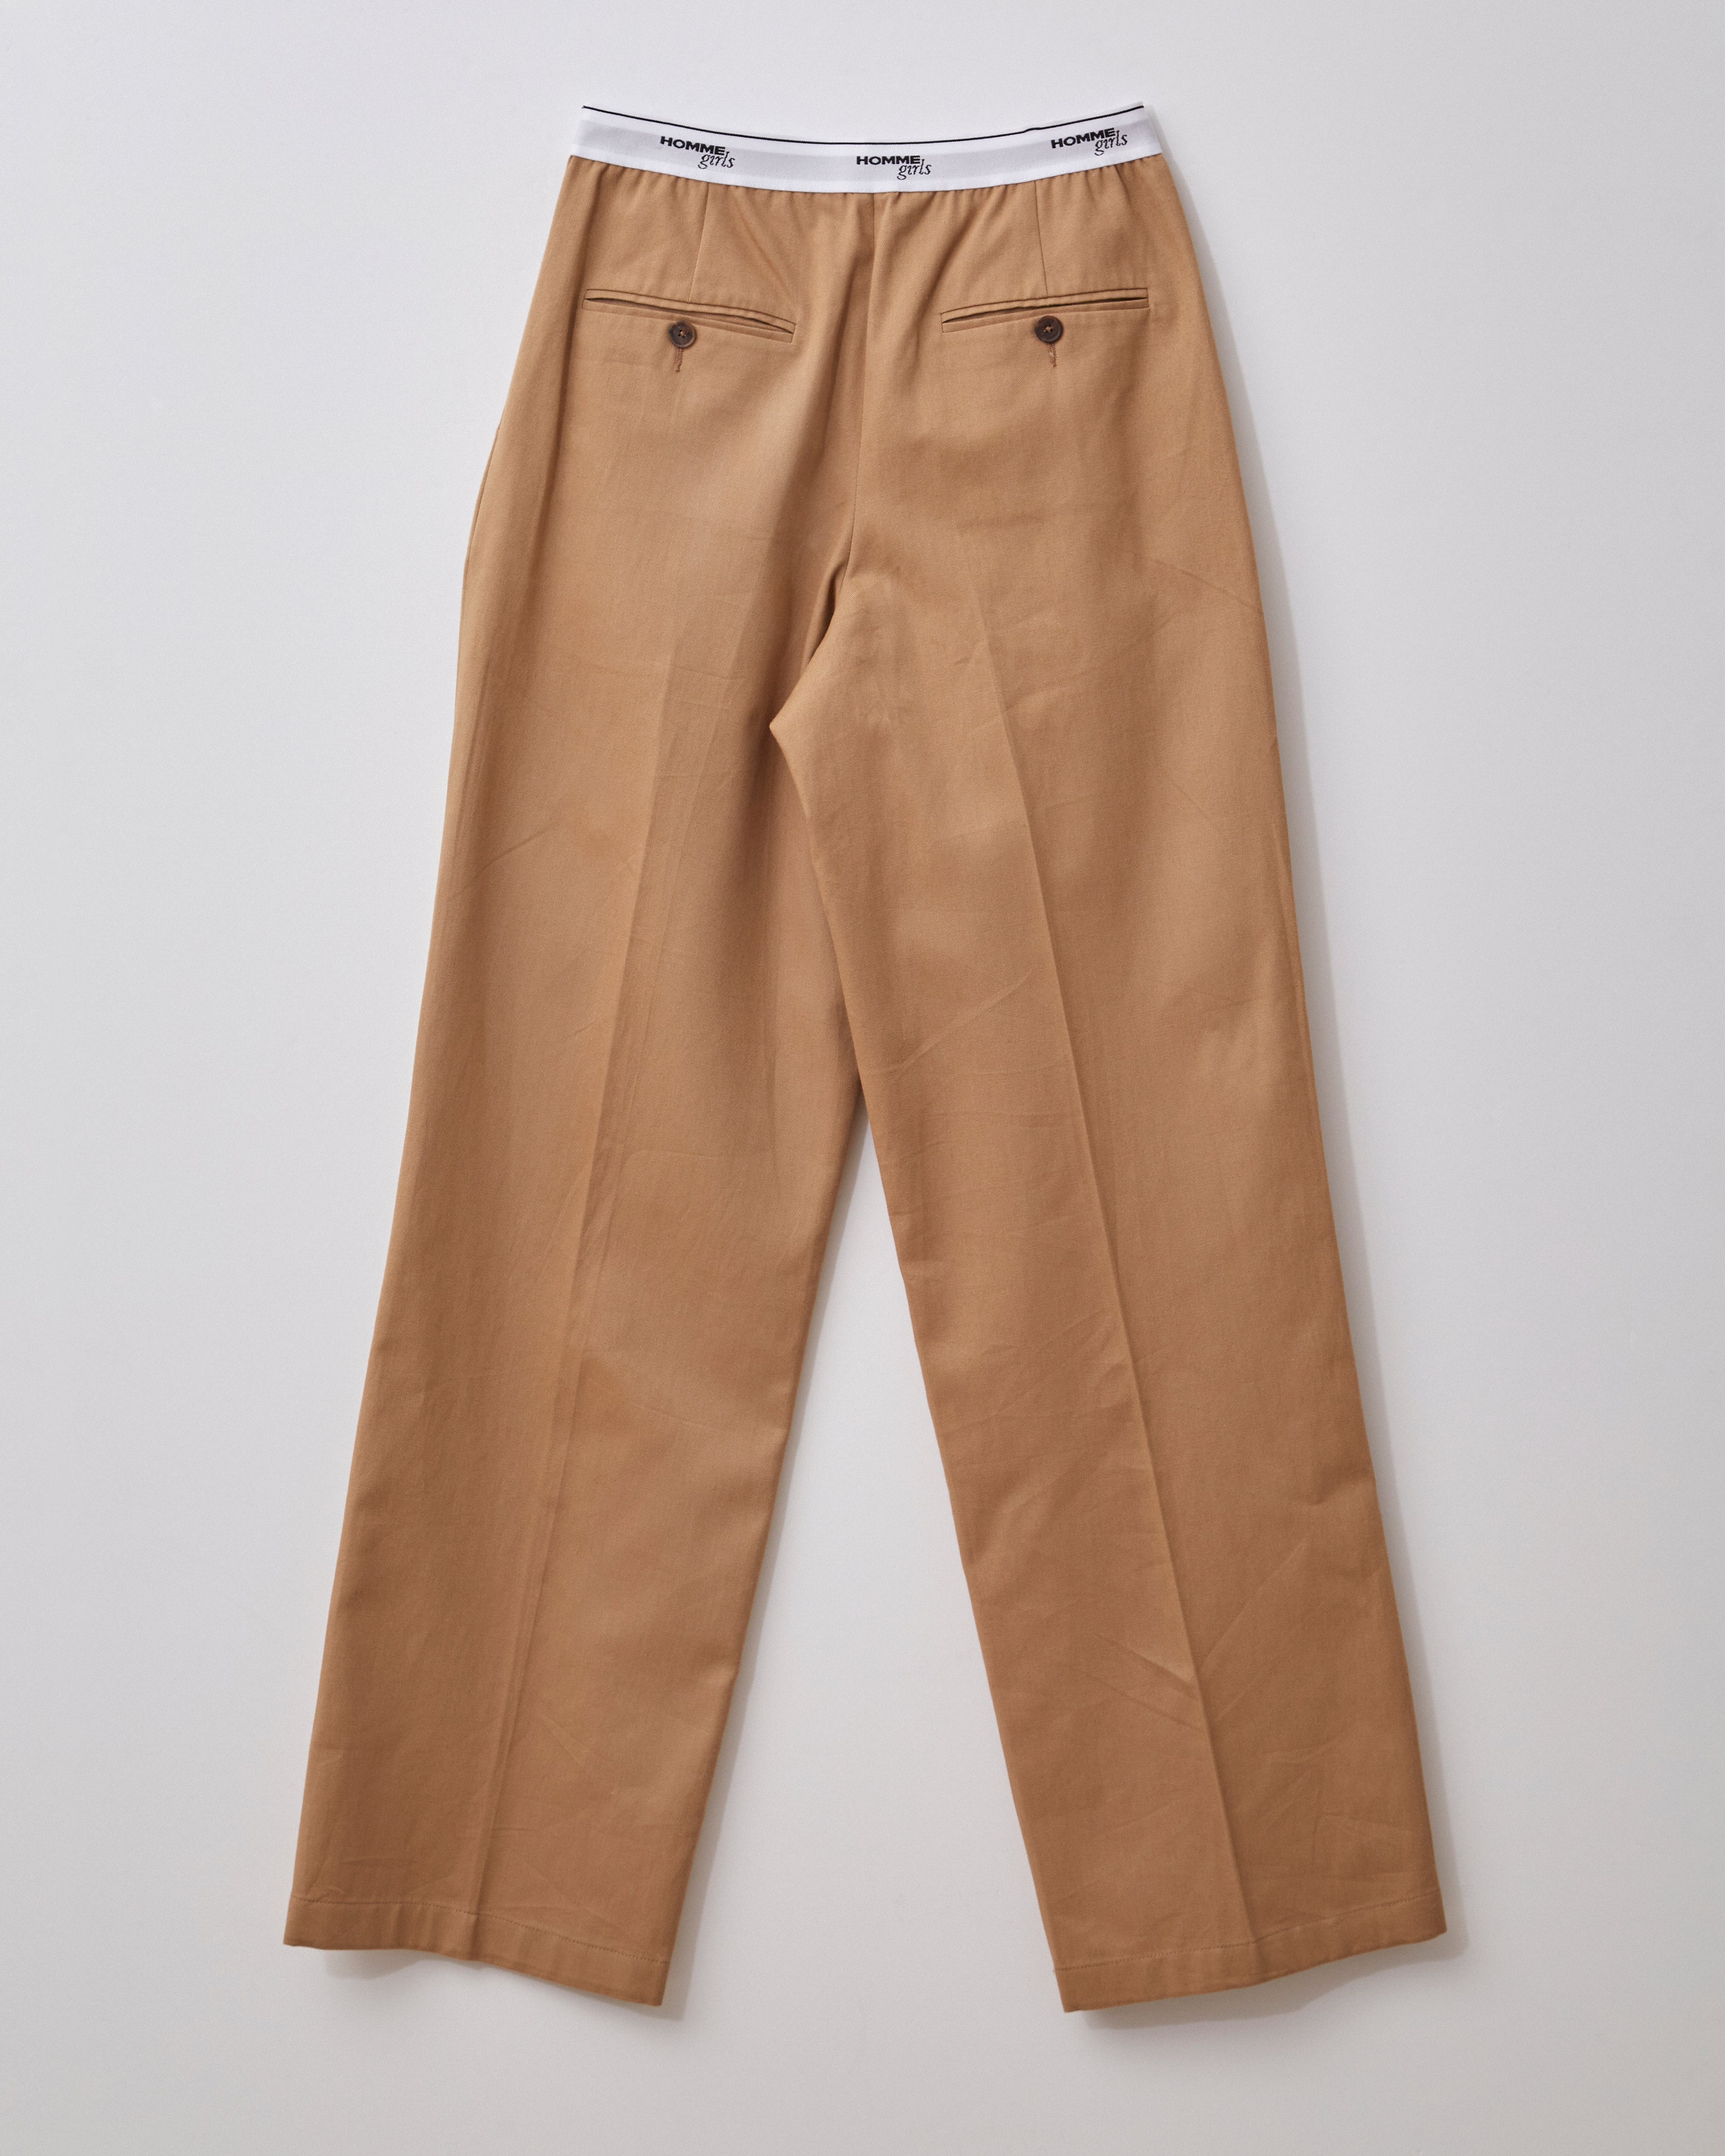 Chaps 34x29 Mens Khaki Pants 100% Cotton Made In Egypt Pleated Cuffed | eBay